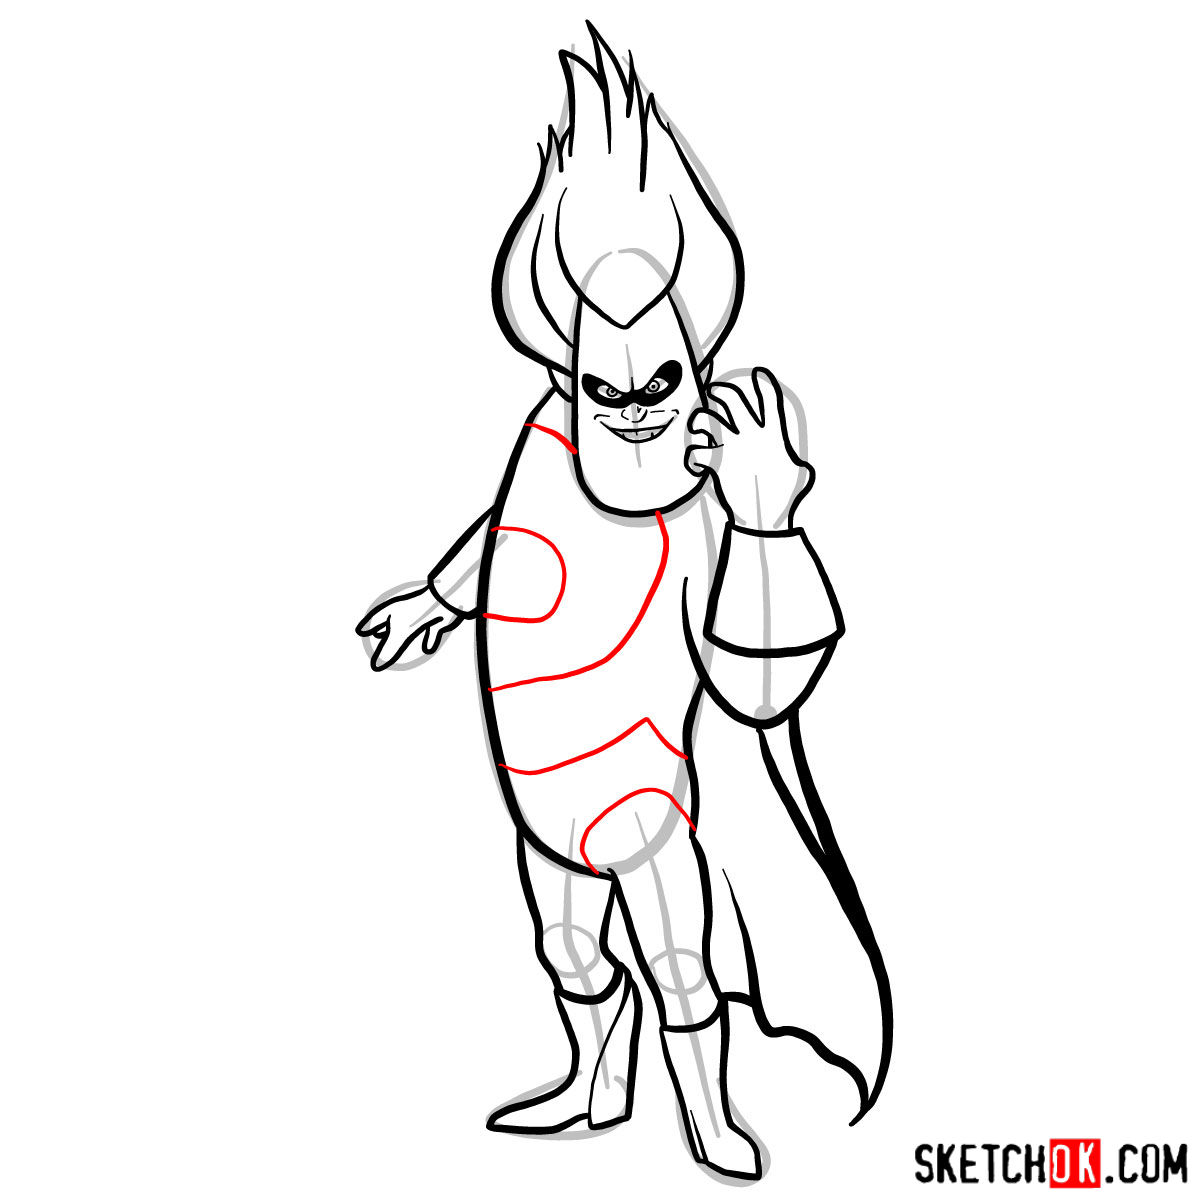 How to draw Buddy Pine (Syndrome) from The Incredibles - step 12